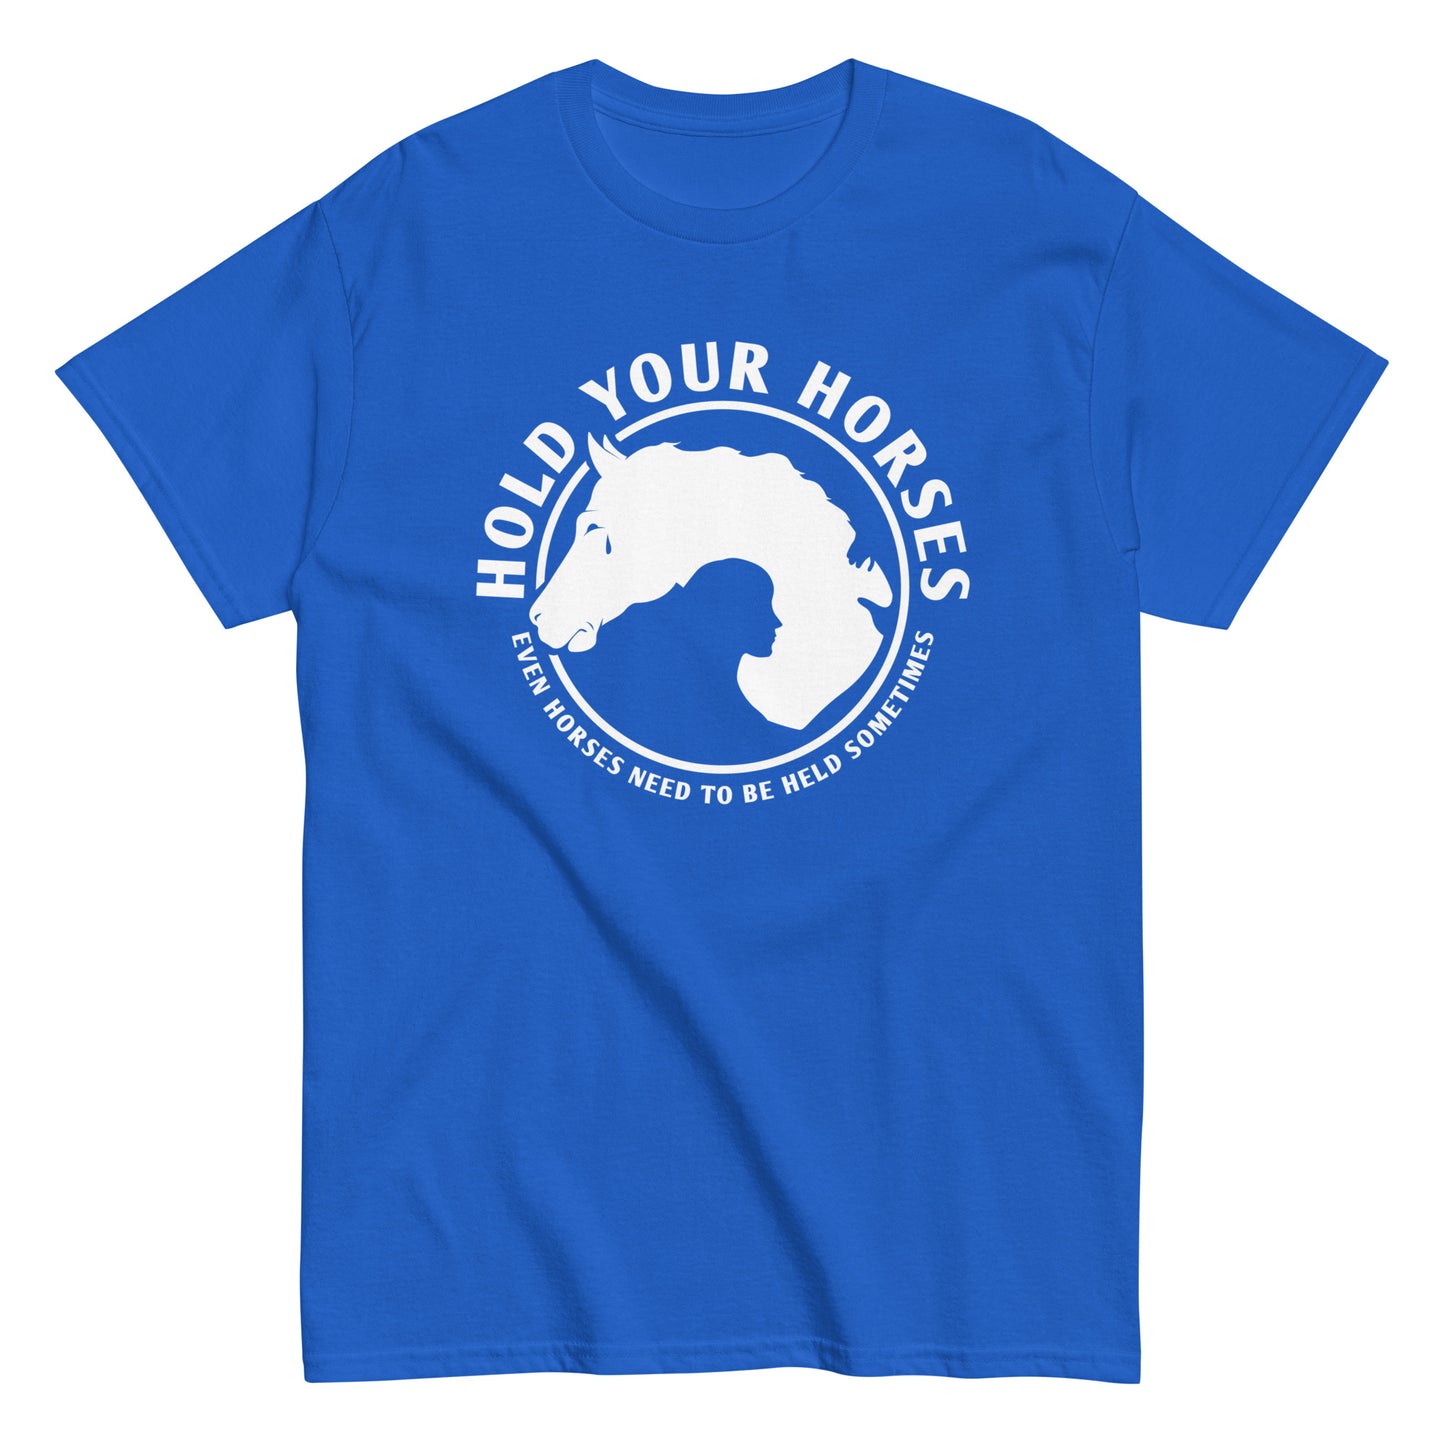 Hold Your Horses Men's Classic Tee